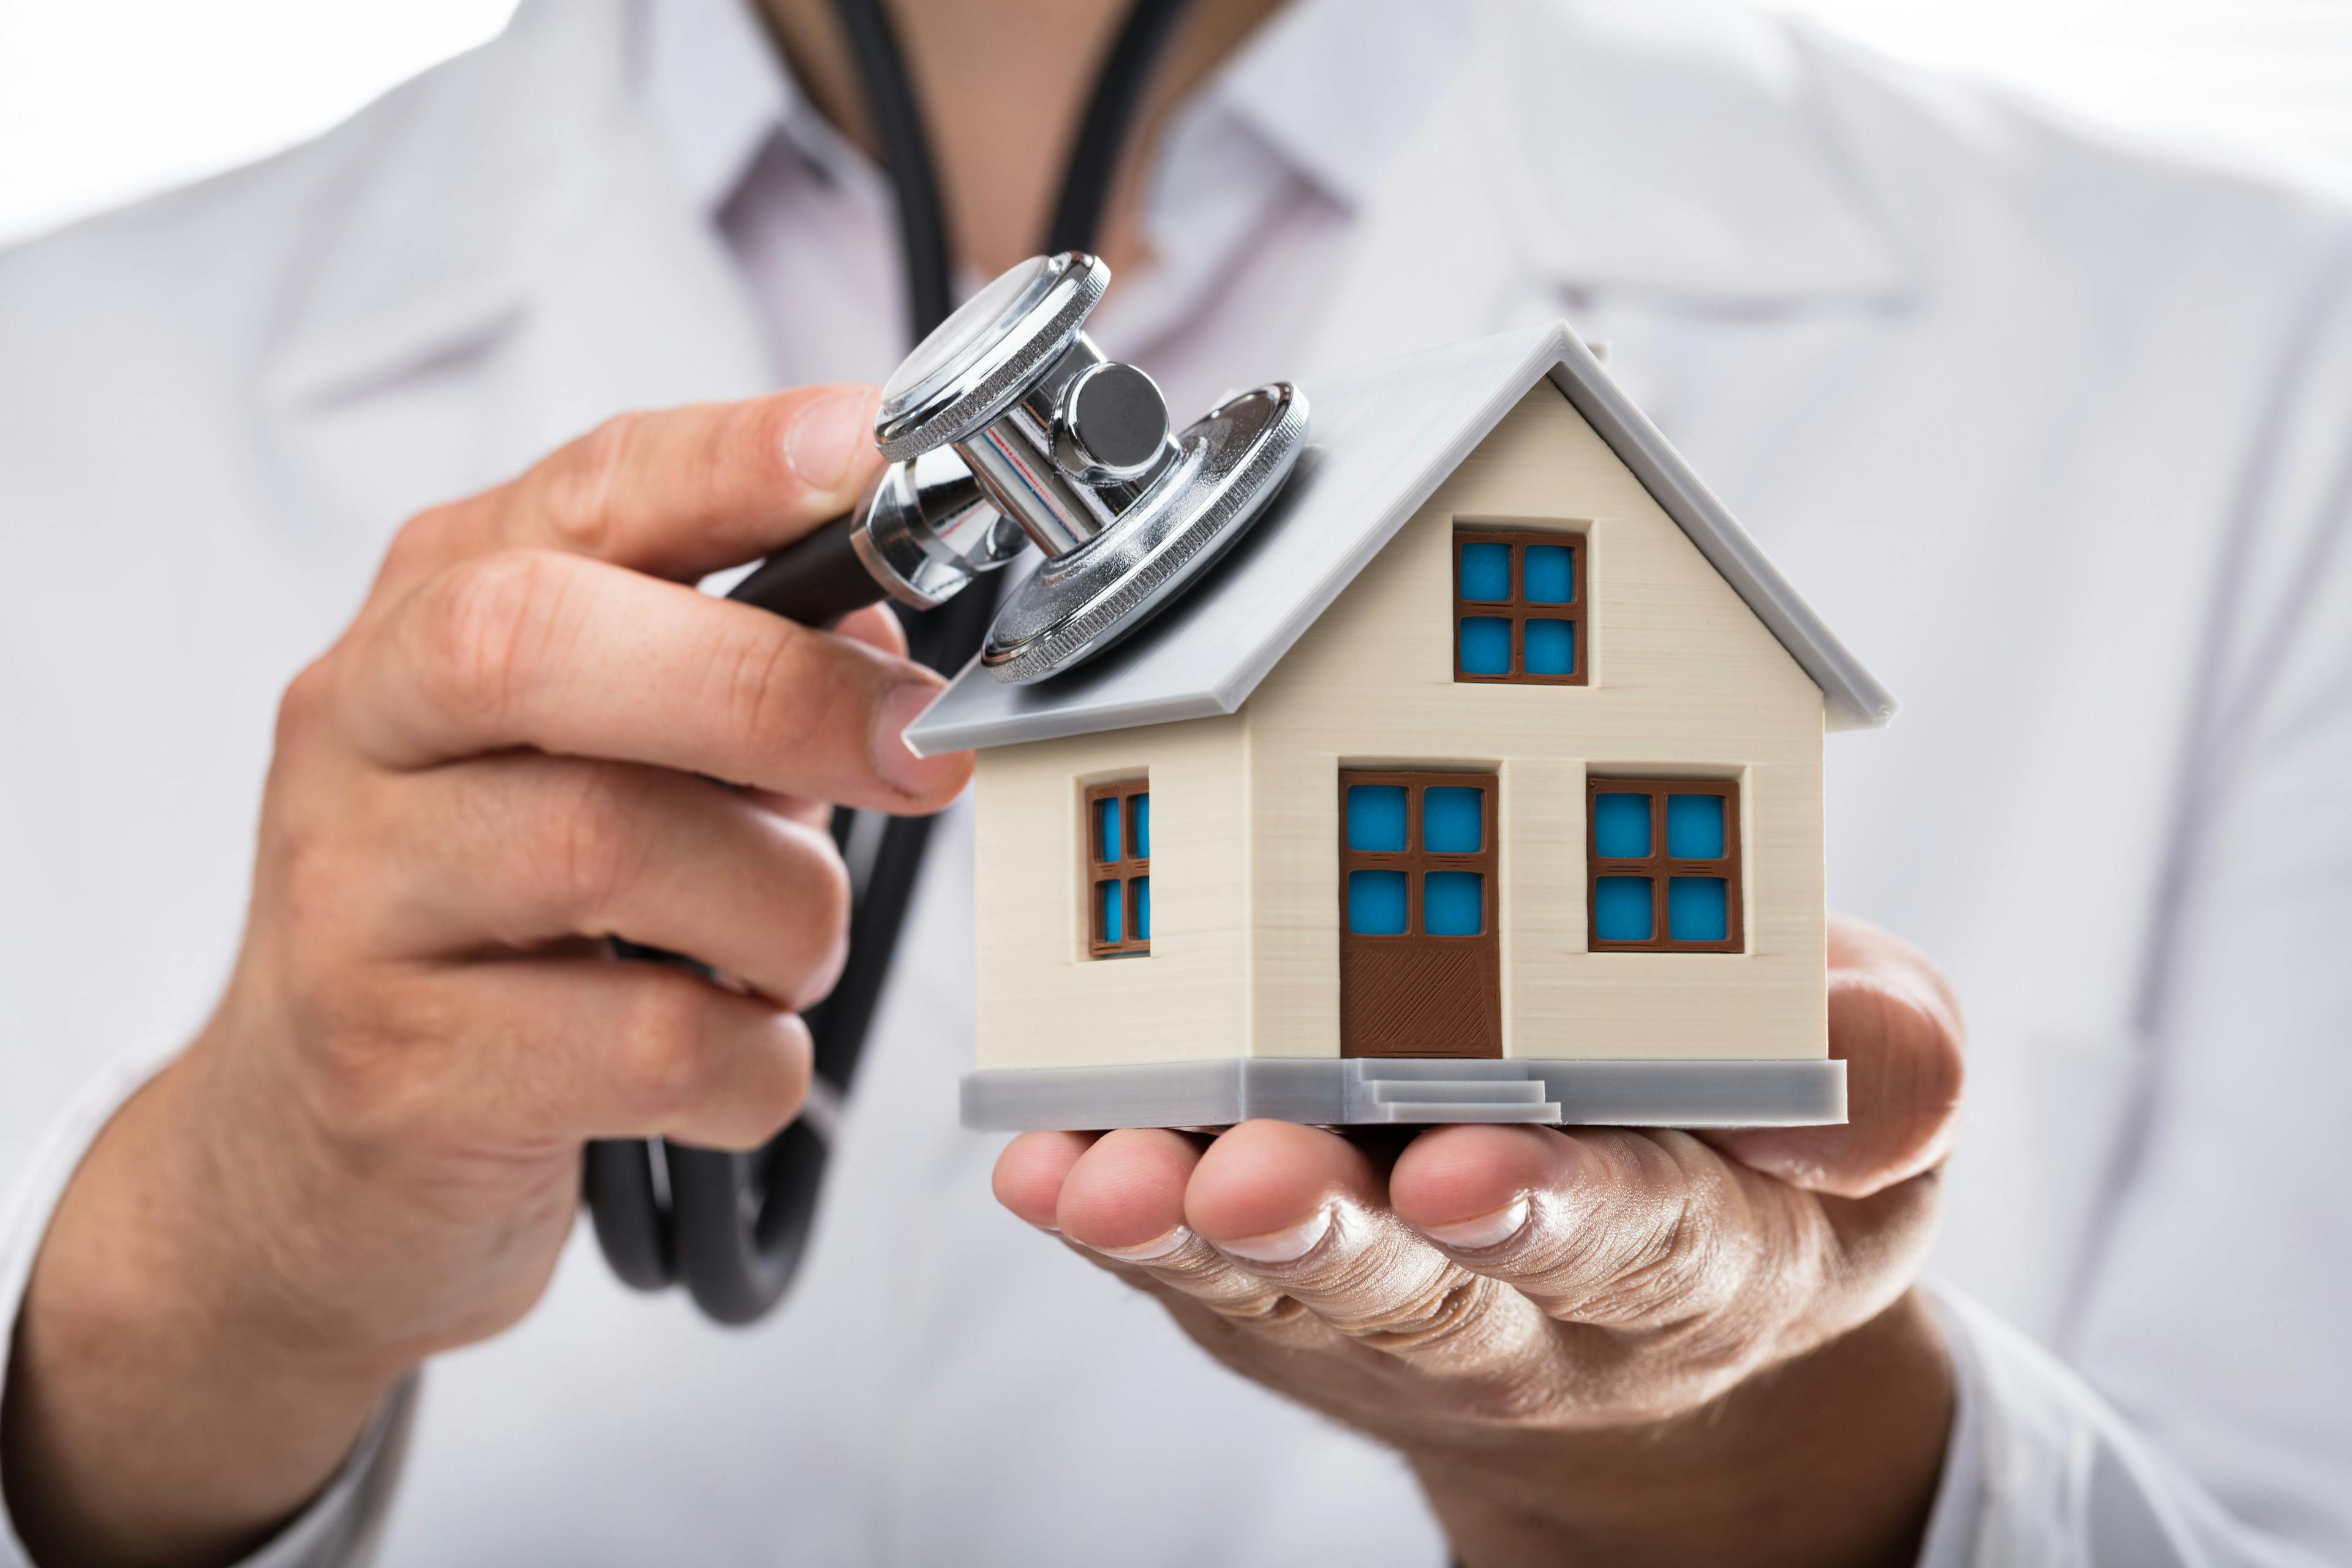 Three common real estate mistakes physicians make